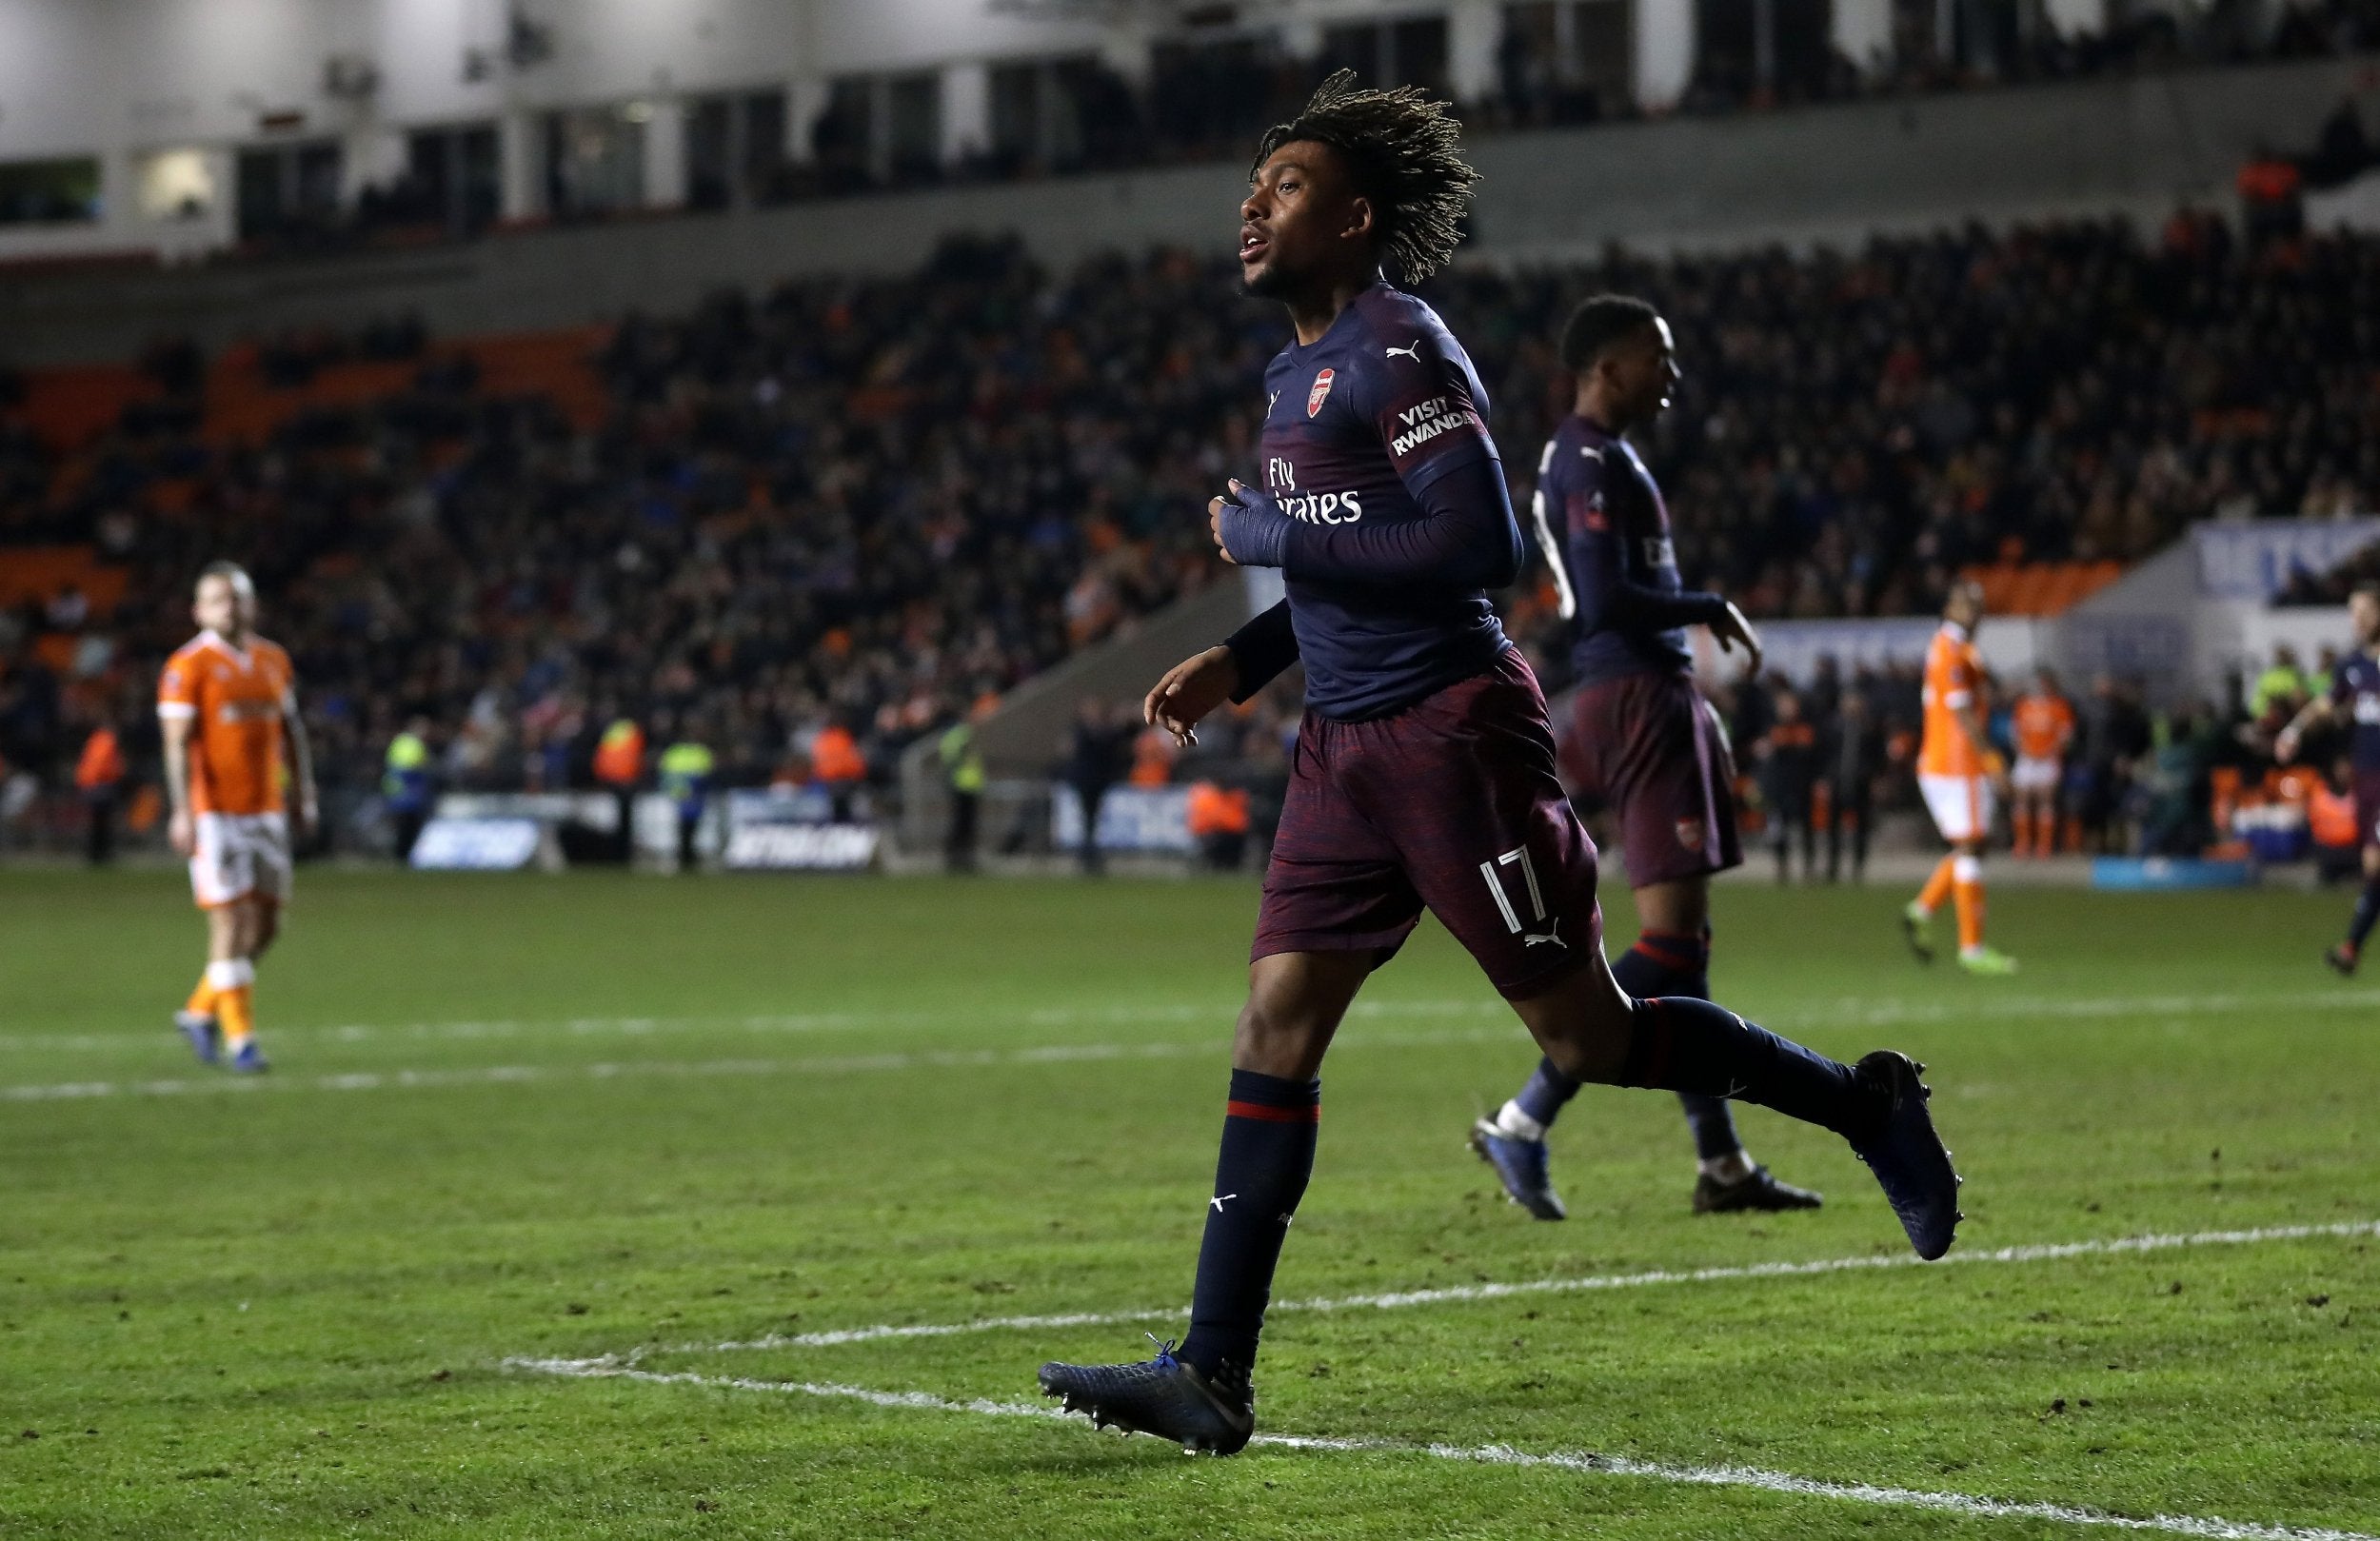 Alex Iwobi completed the victory with a late third